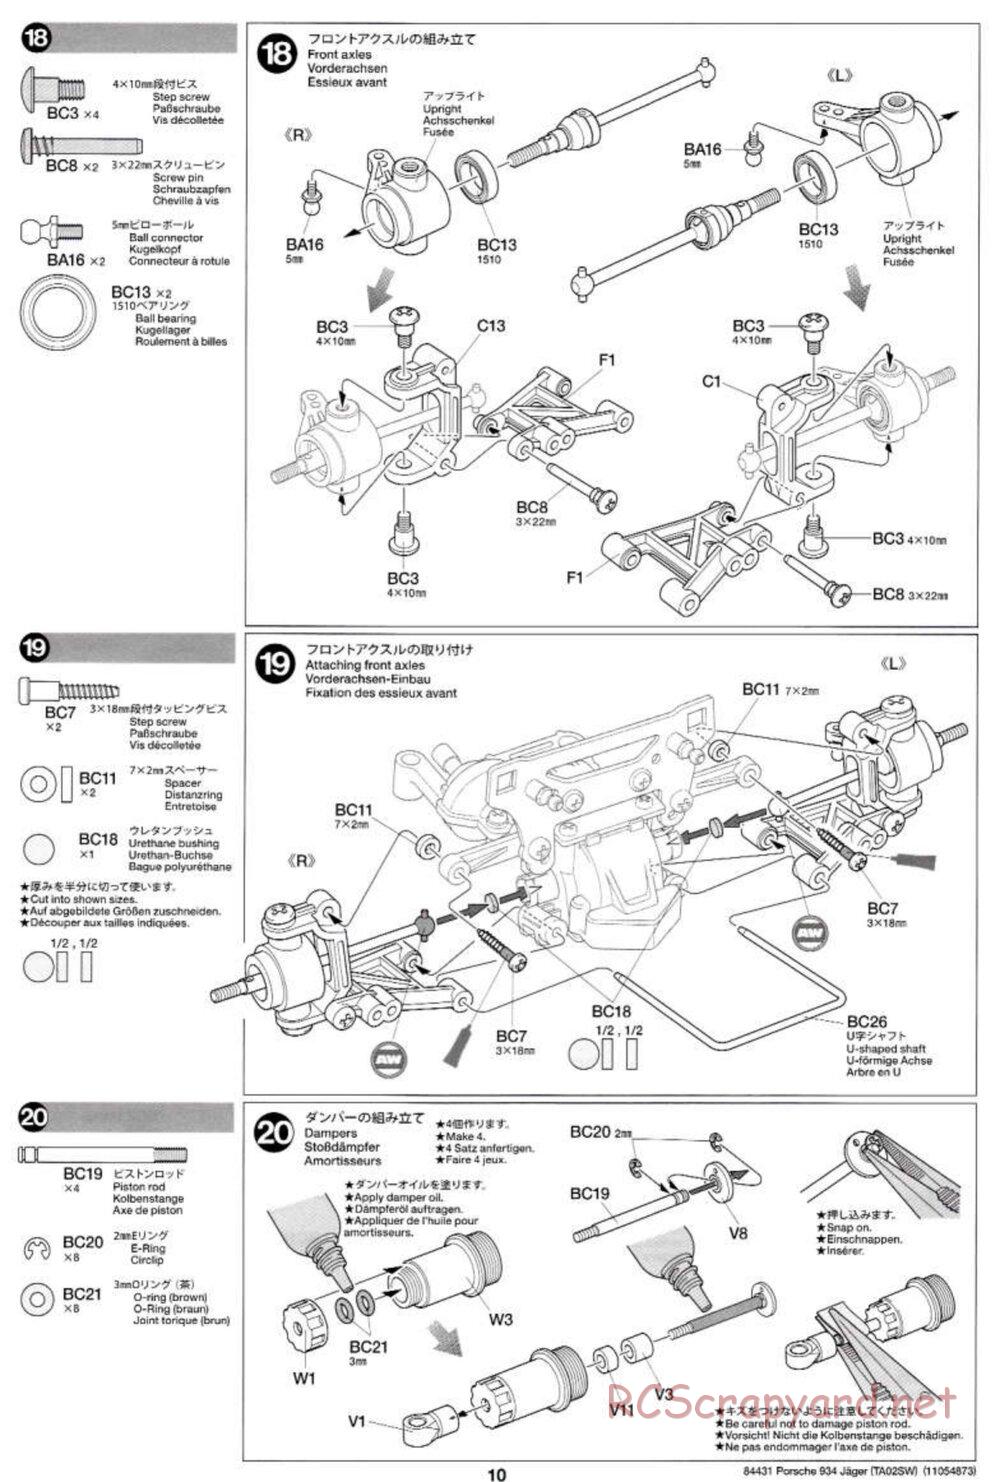 Tamiya - Porsche Turbo RSR Type 934 Jagermeister - TA-02SW Chassis - Manual - Page 10